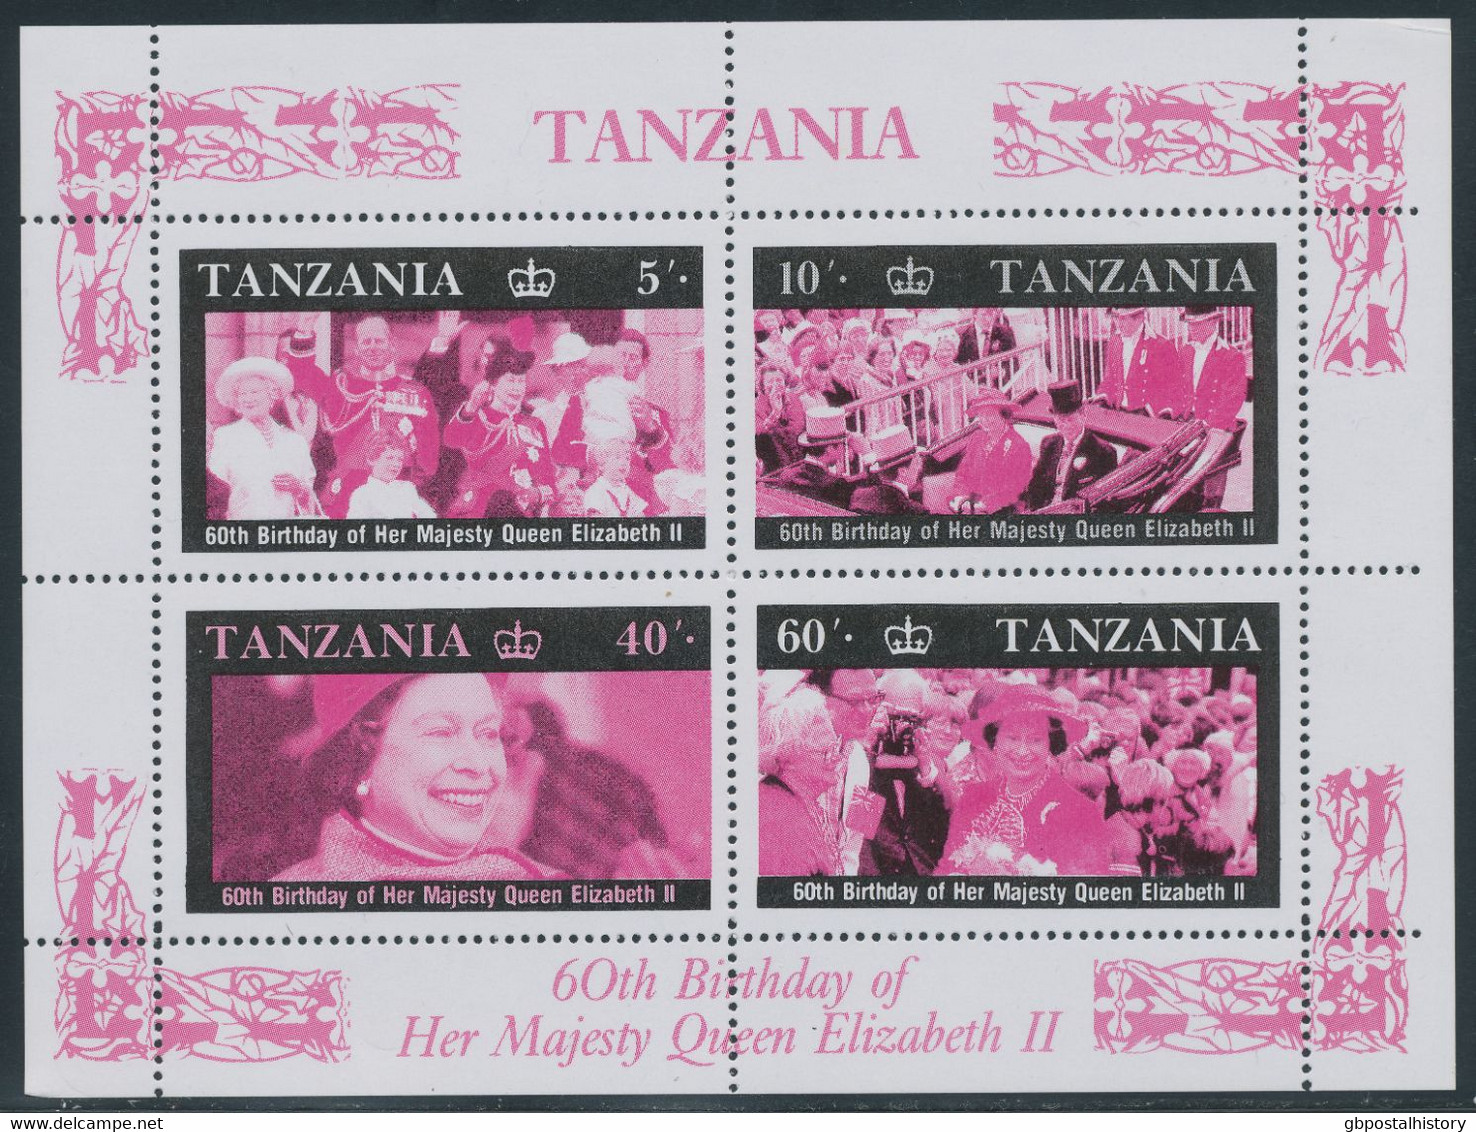 TANZANIA 1987, 60th Birthday Of Queen Elizabeth II, MAJOR VARIETY: Superb U/M MS With MISSING COLORS Yellow And Blue, - Tanzanie (1964-...)